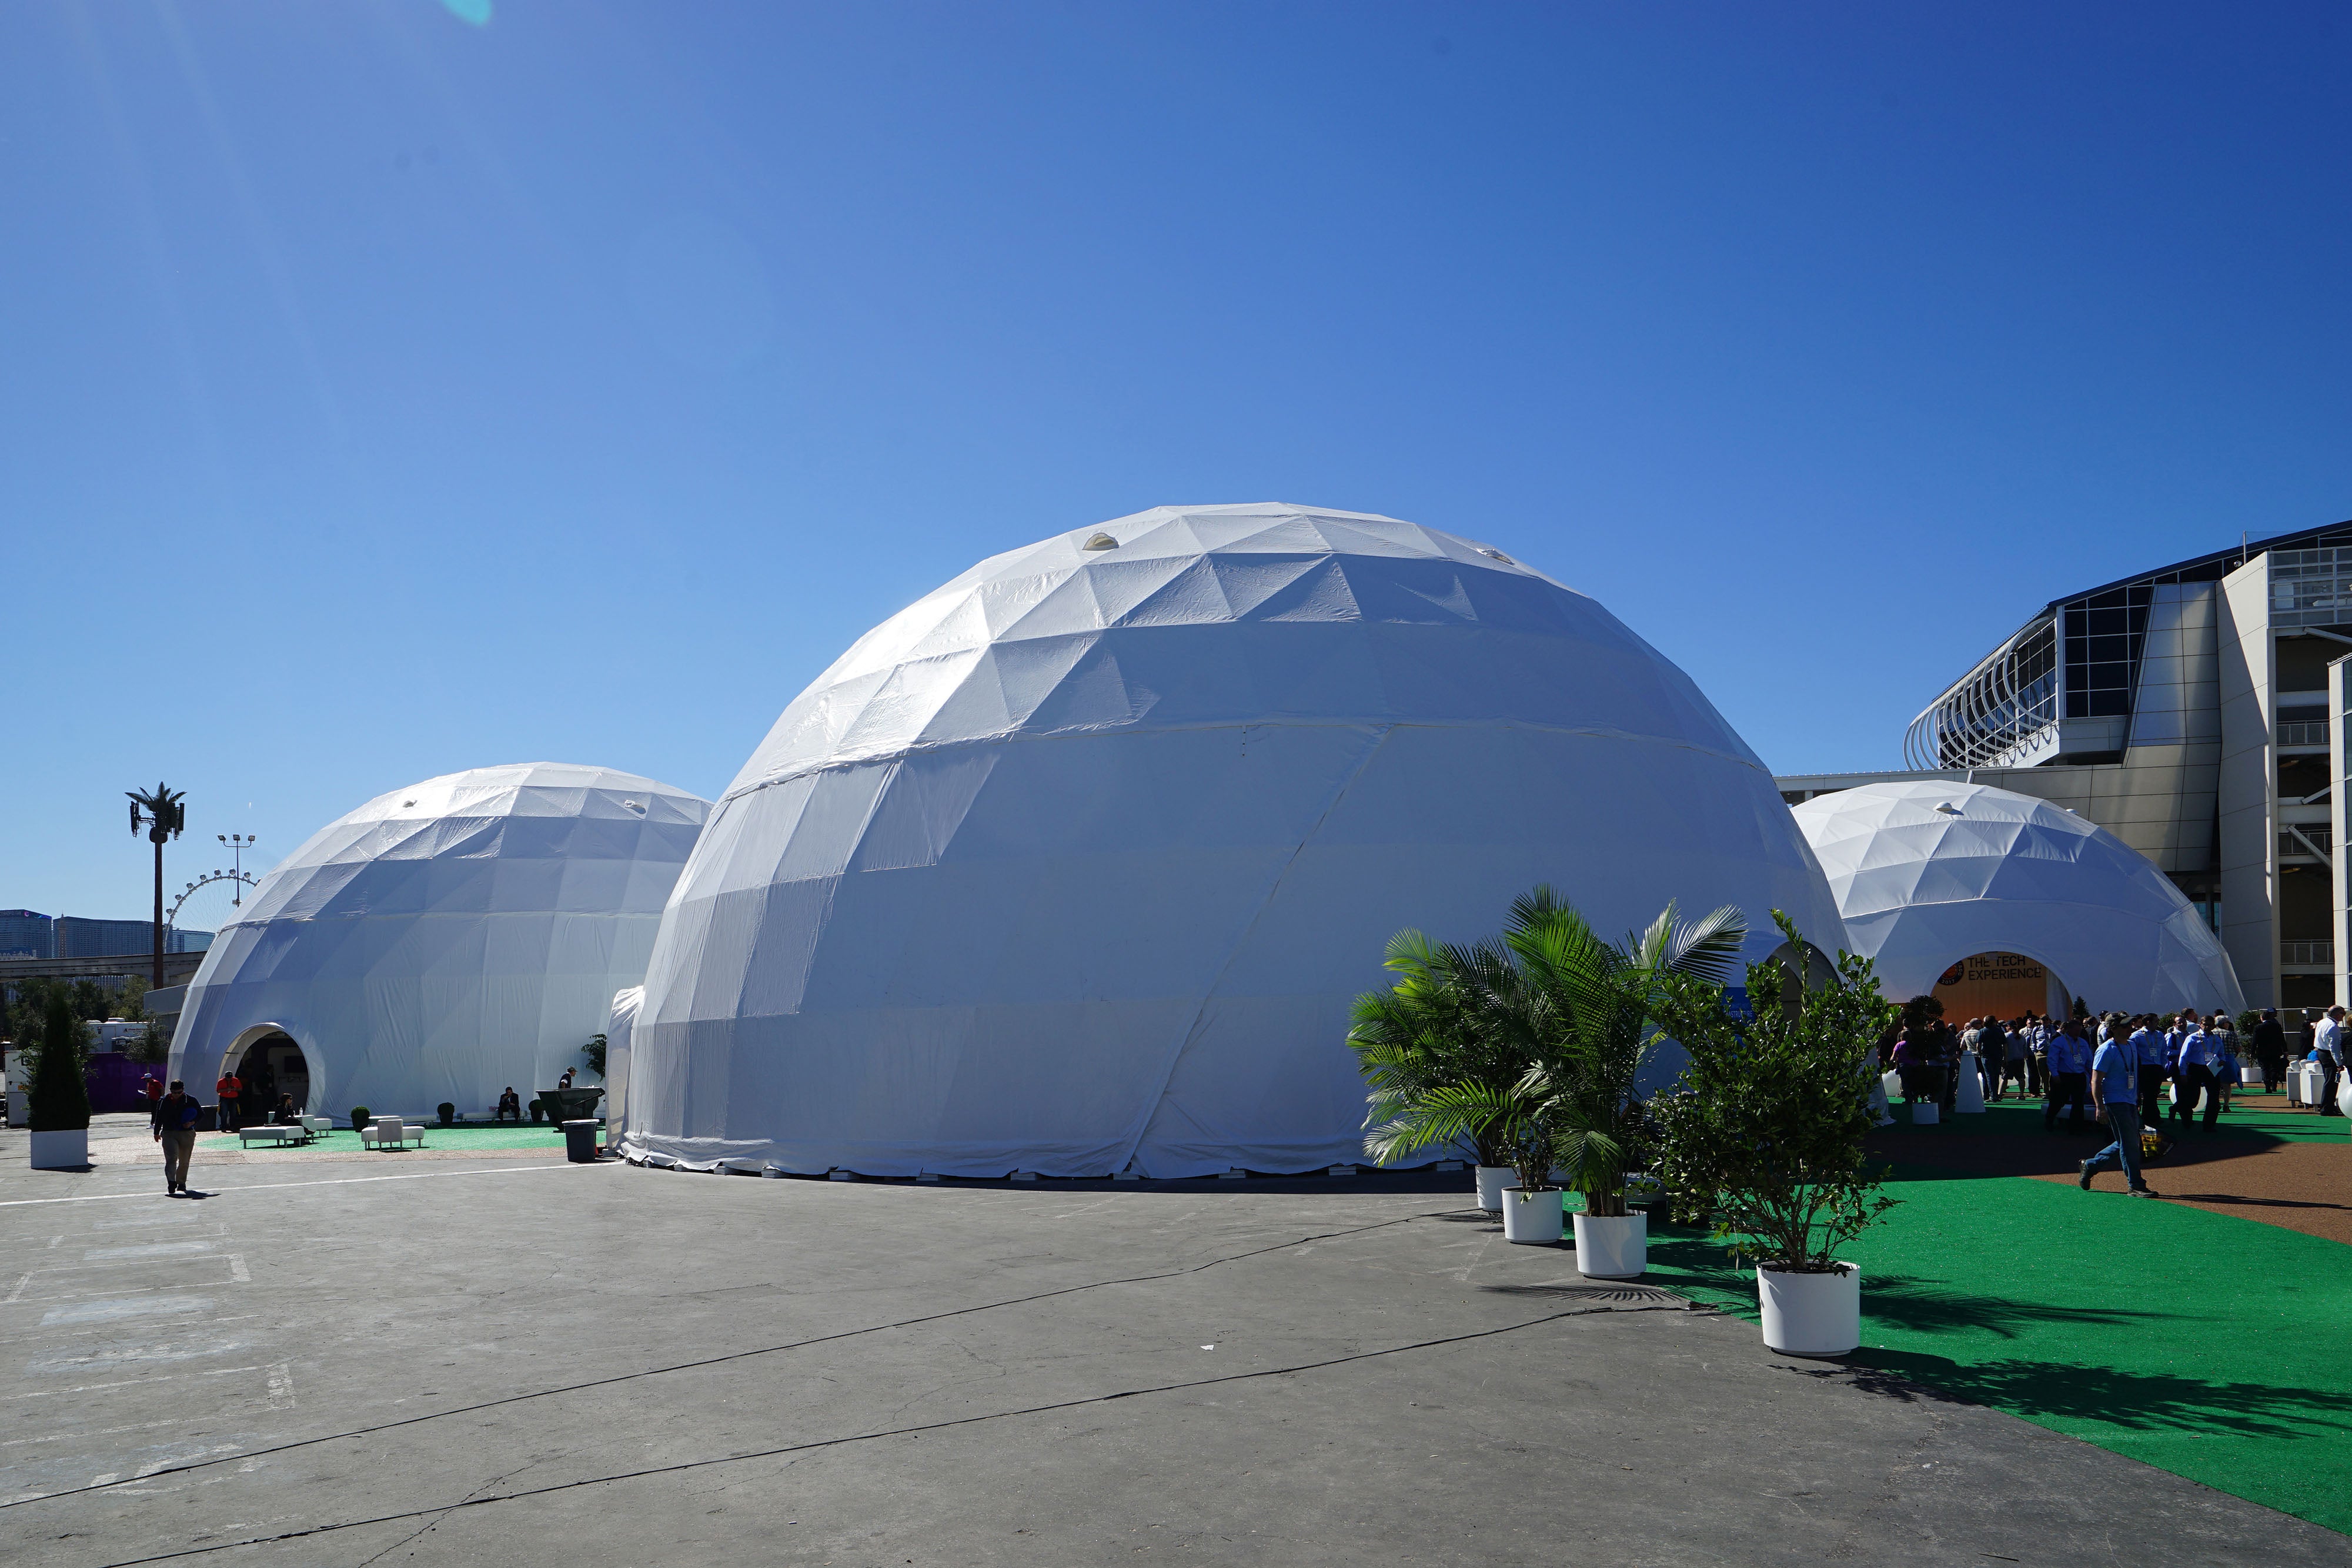 Commercial giant geodesic dome for event / expo / wedding / bar